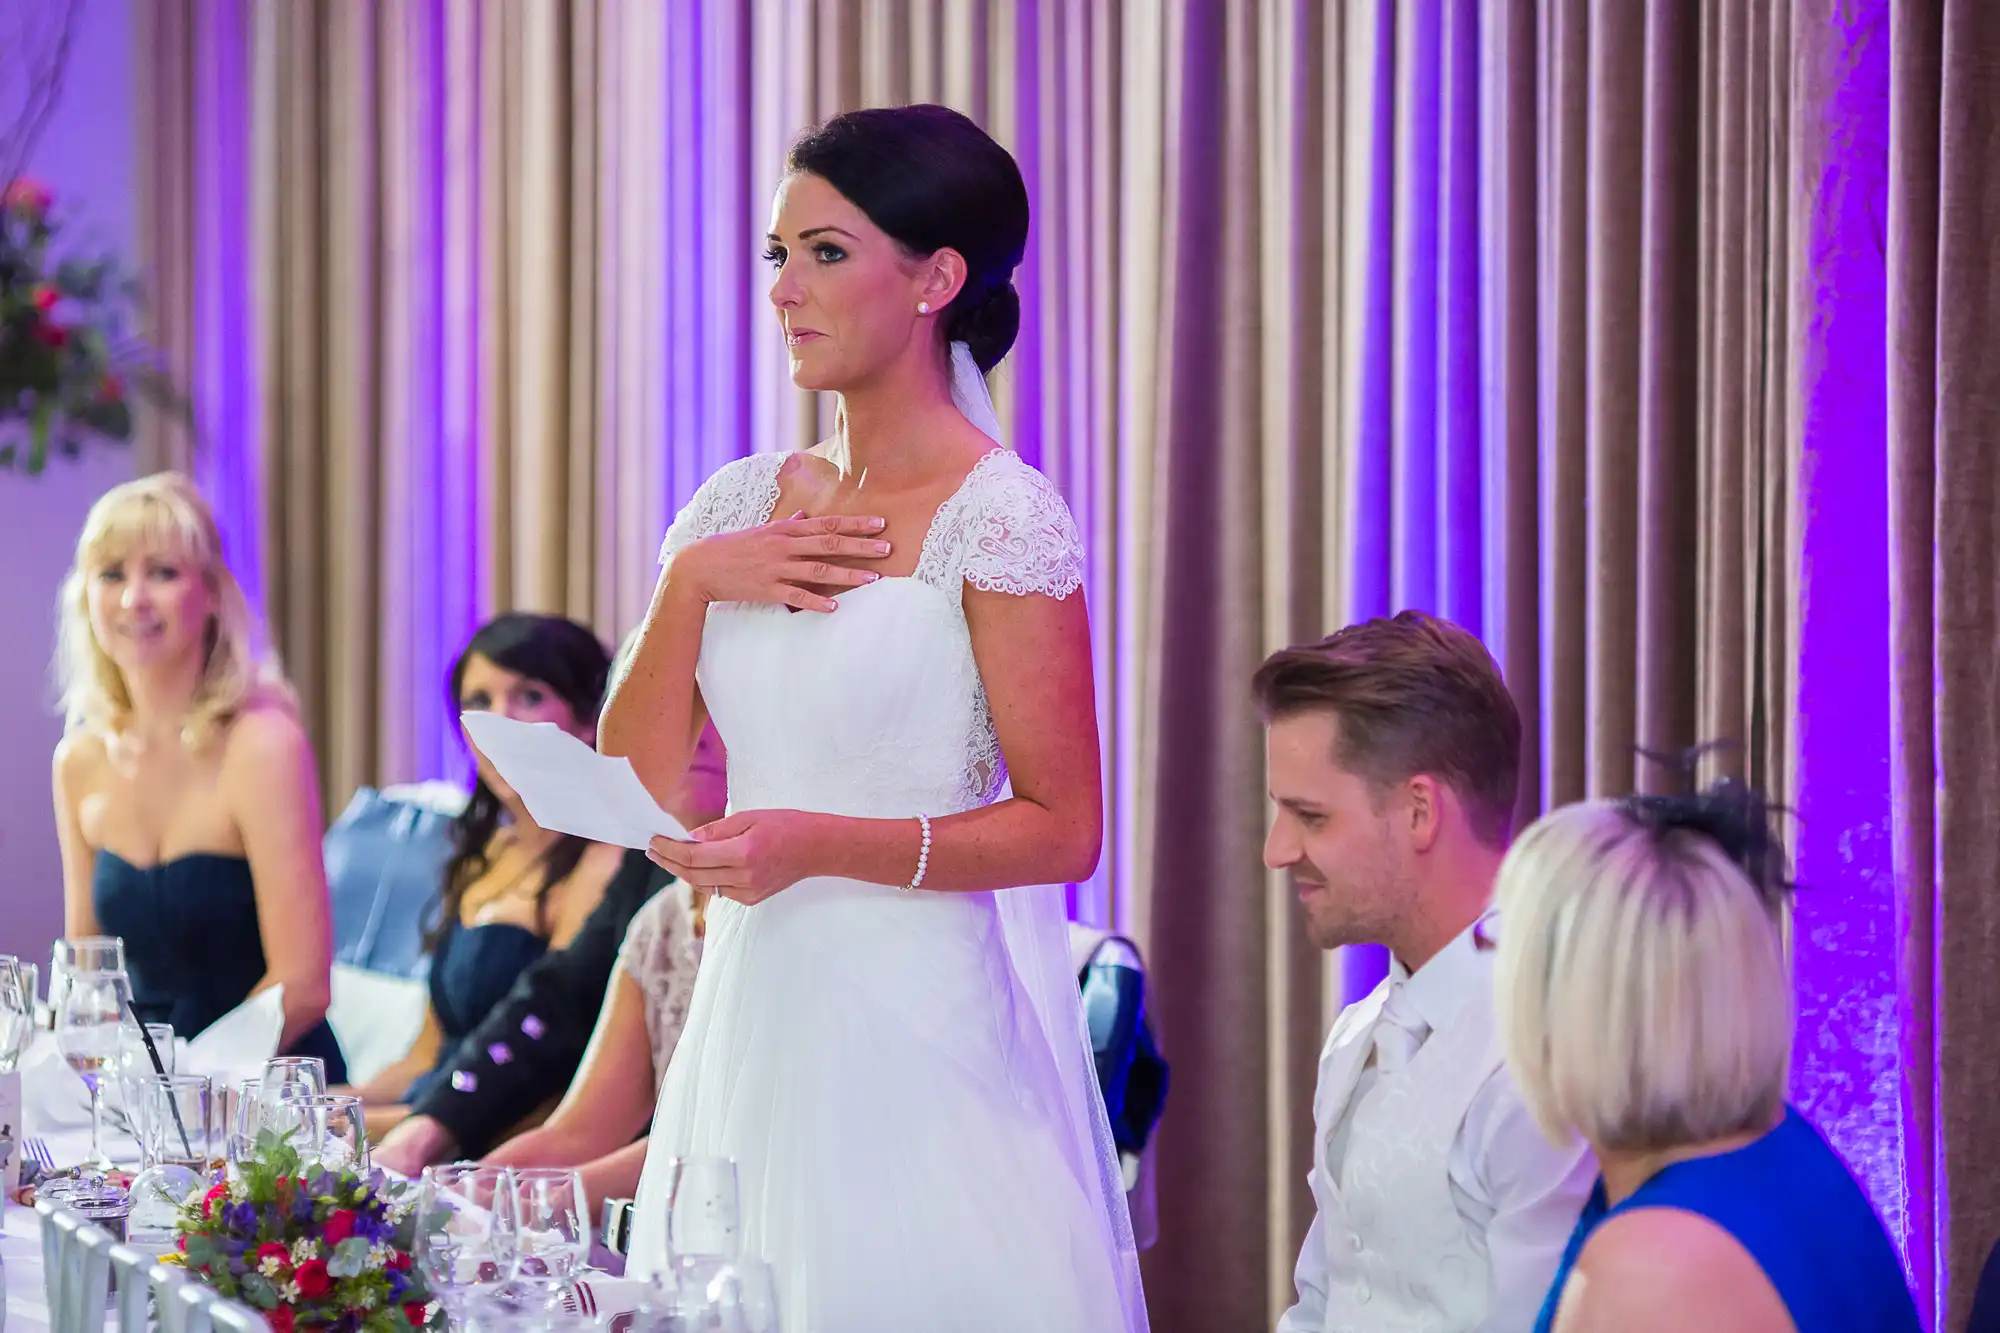 A bride in a white lace dress stands giving a speech at a reception, while guests at the dinner table watch attentively.